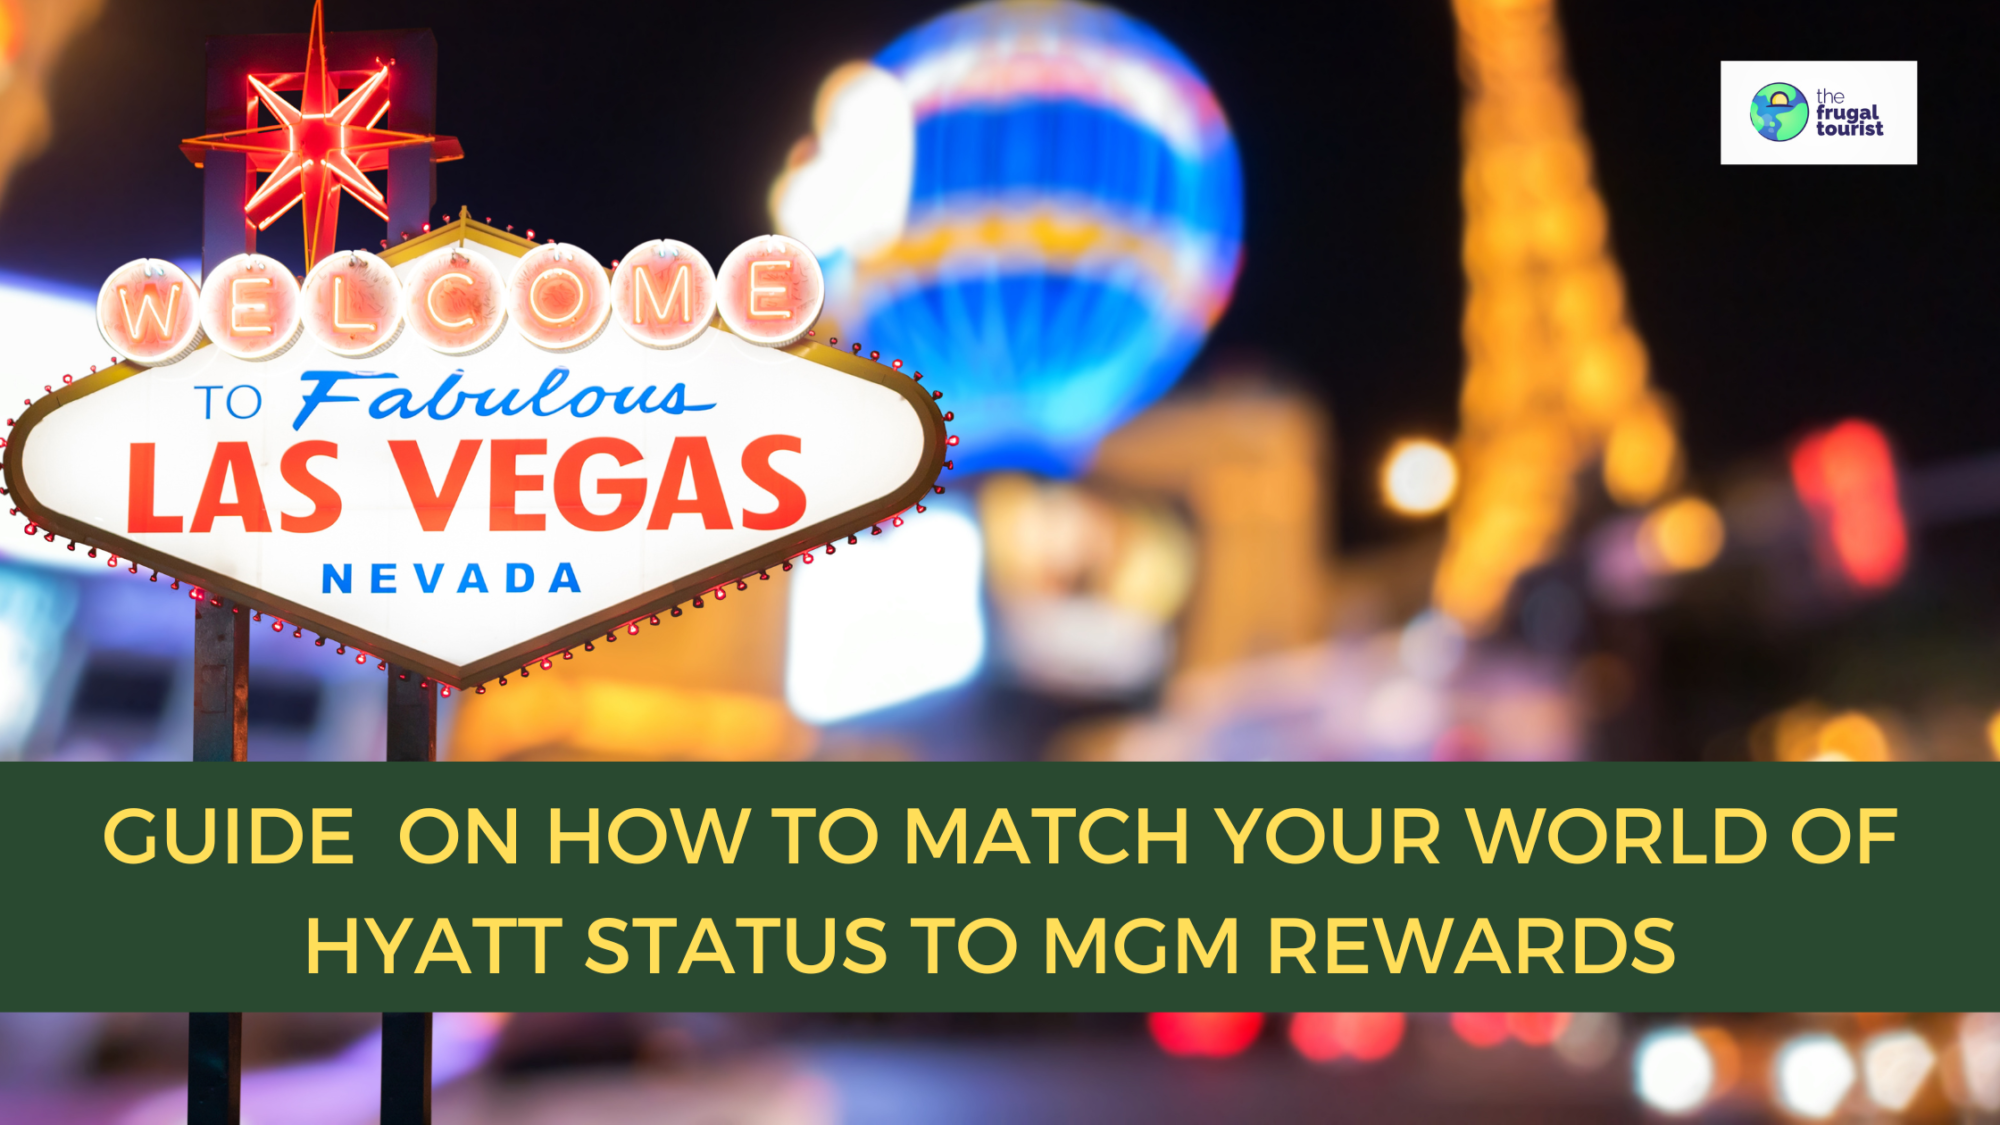 Guide on How to Match Your World of Hyatt Status to MGM Rewards